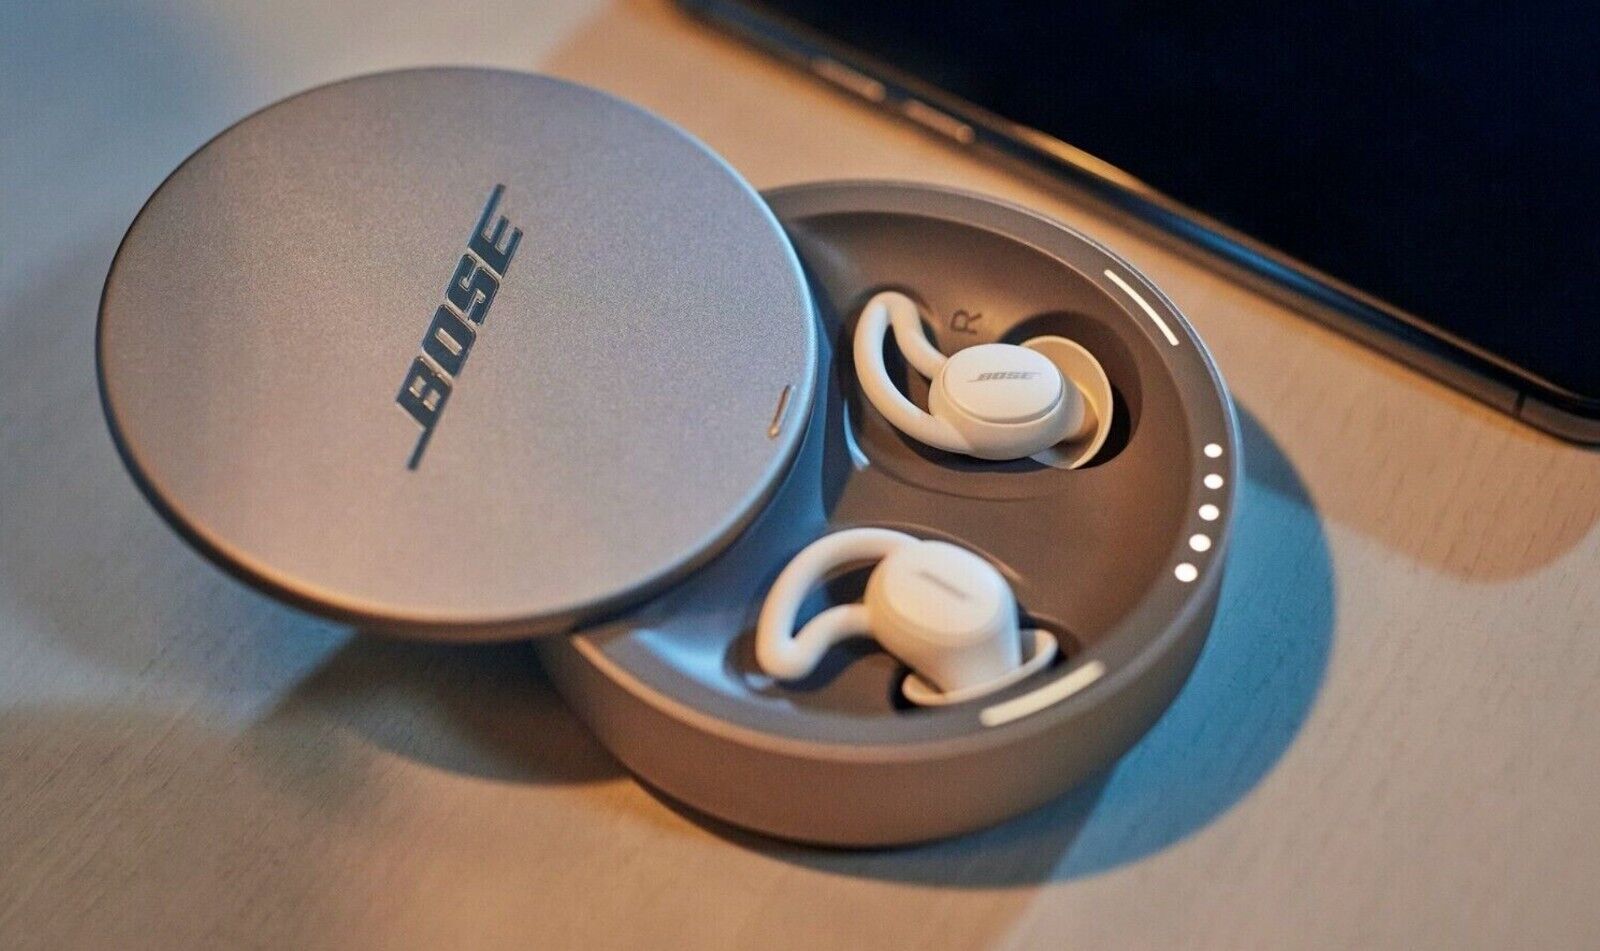 Bose Sleepbuds II: Unique Earbuds Reduce Distractions And Improve Sleep Quality